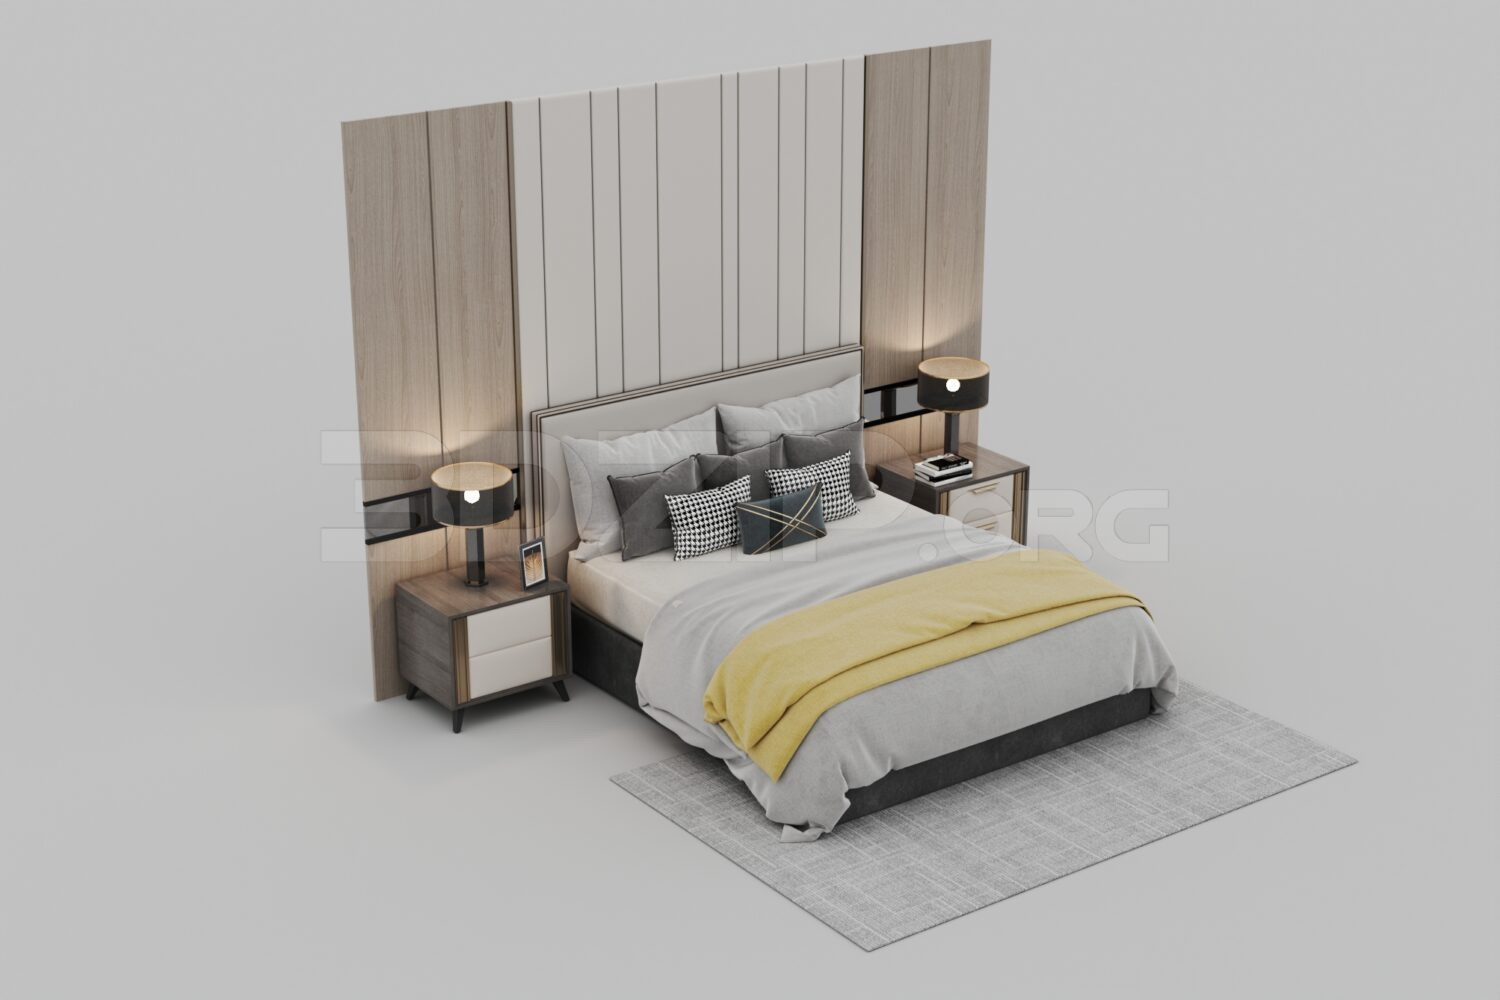 2166. Download Free Bed Model By Le Viet Long